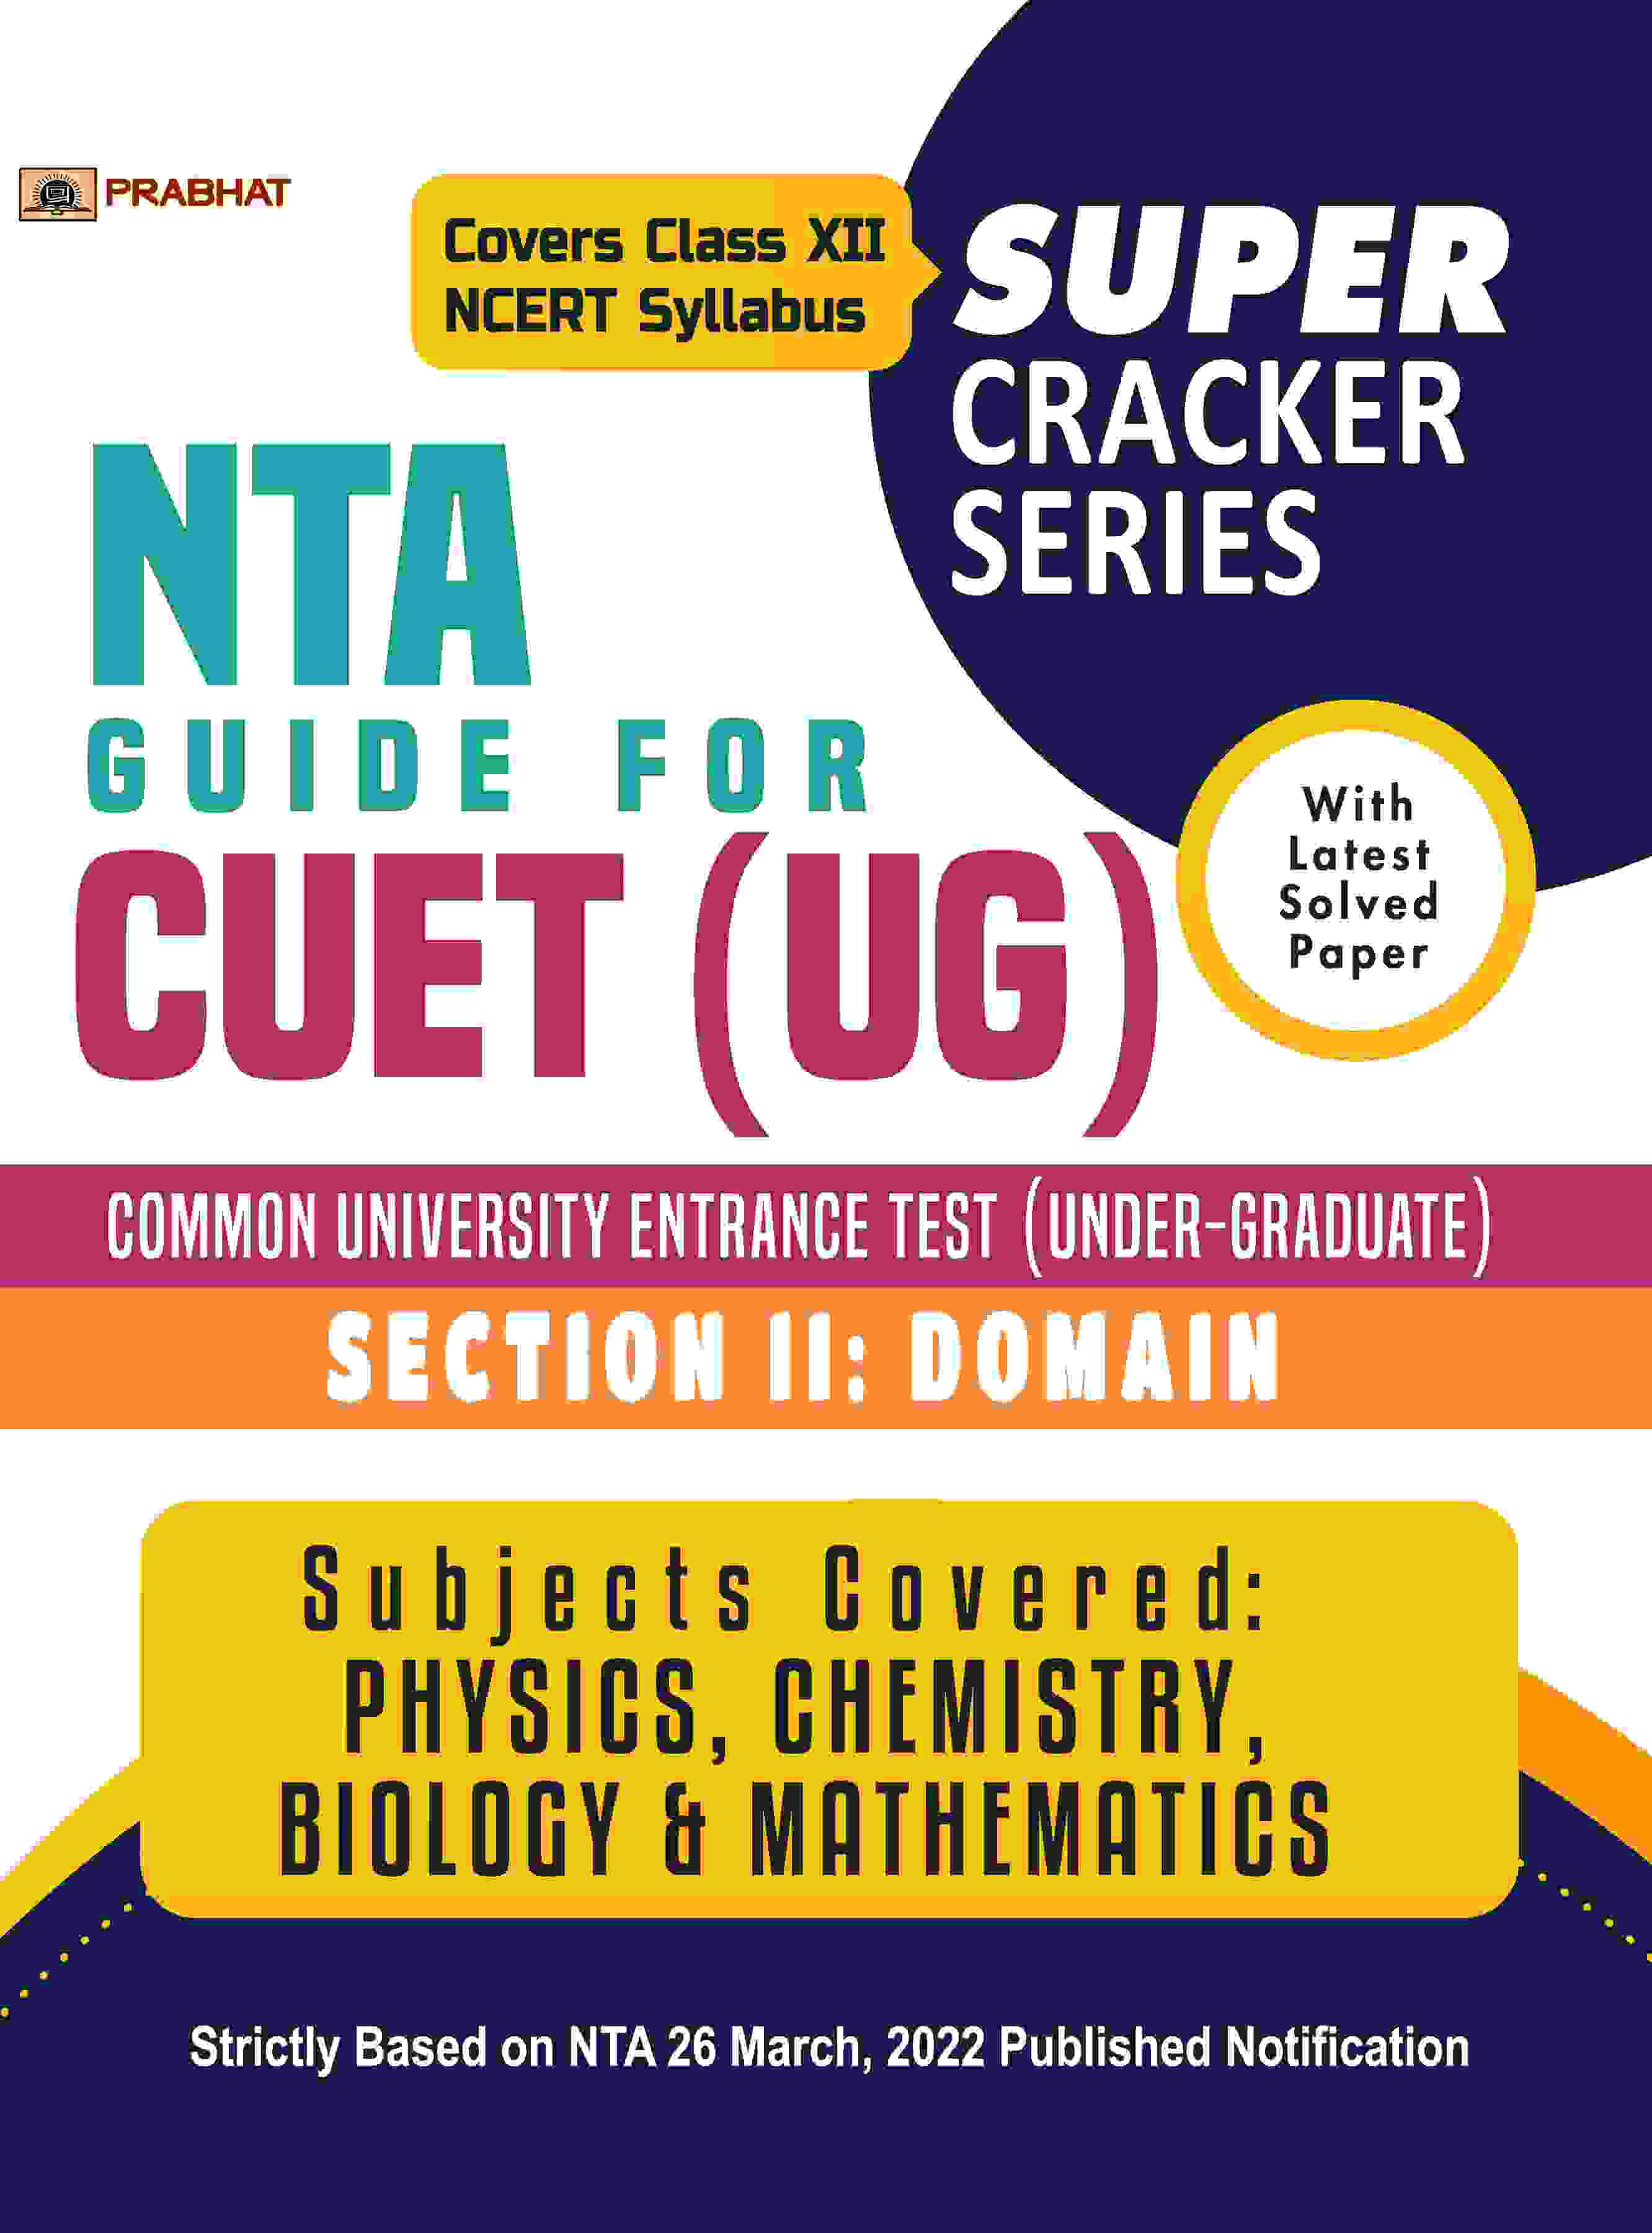 (Super Cracker Series) NTA CUET UG (Section 2 Domain) Physics, Chemistry, Mathematics and Biology Guide Book